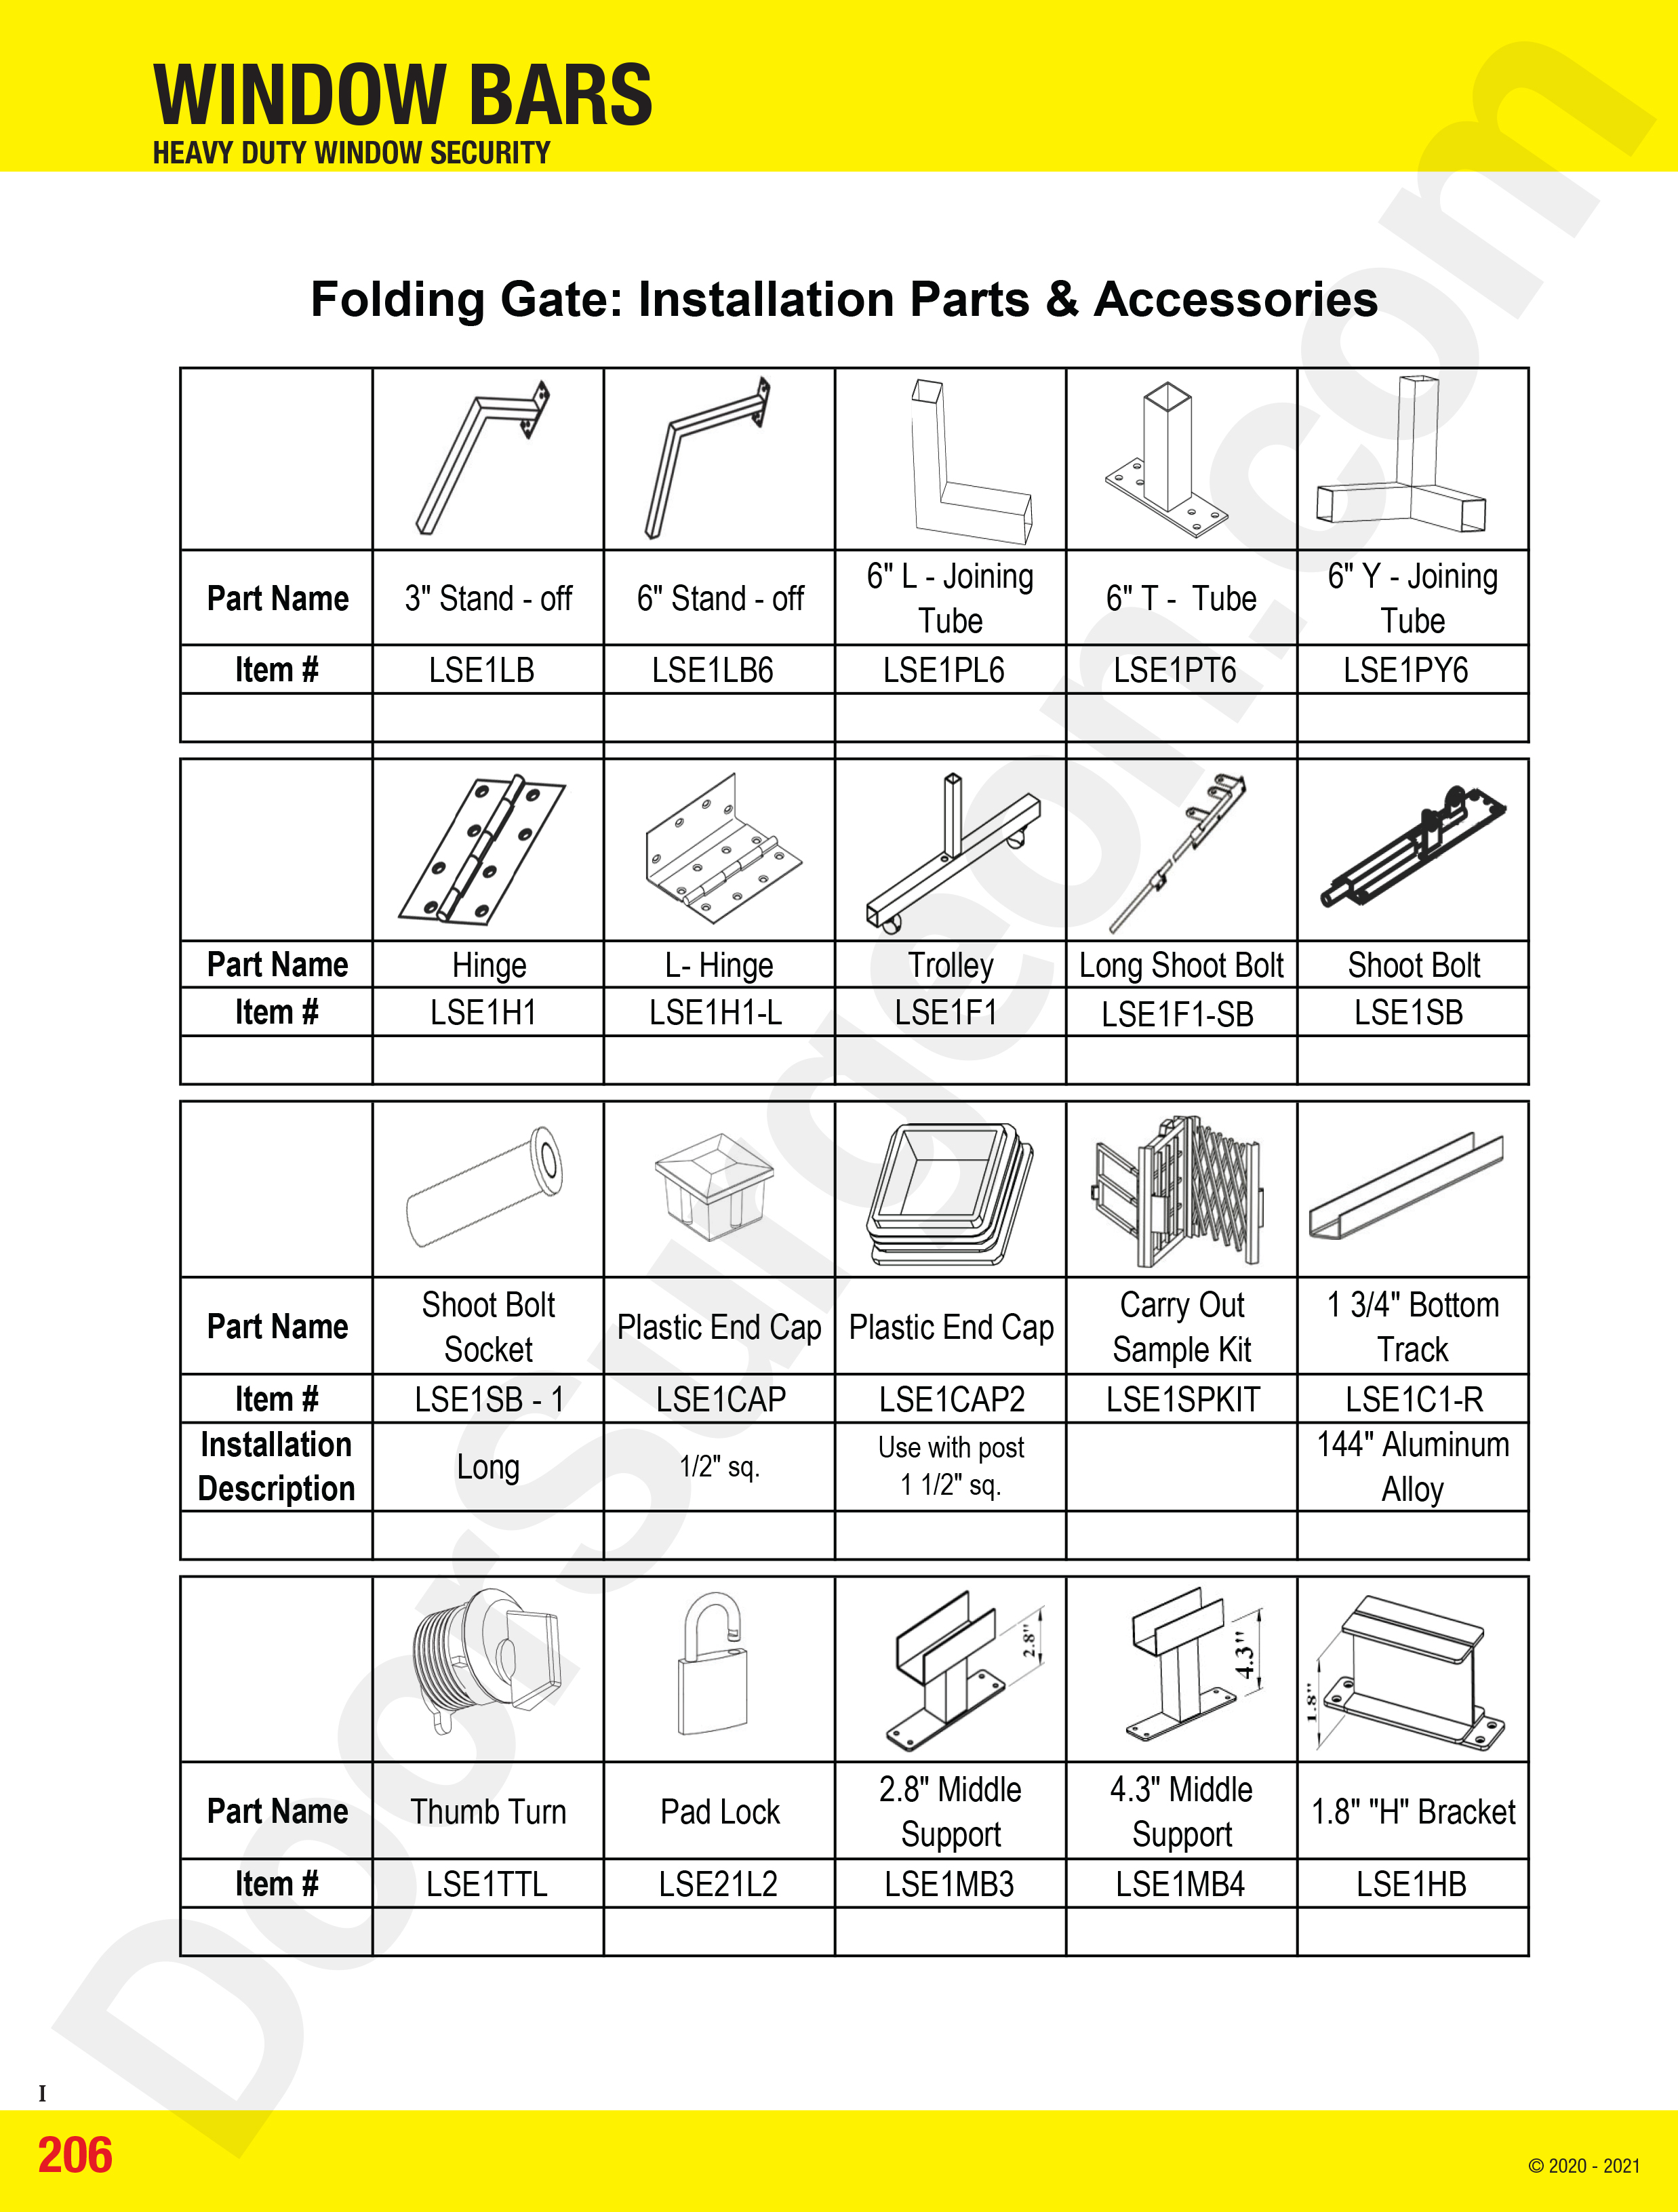 Spruce Grove Door Surgeon folding gates installation parts and accessories.